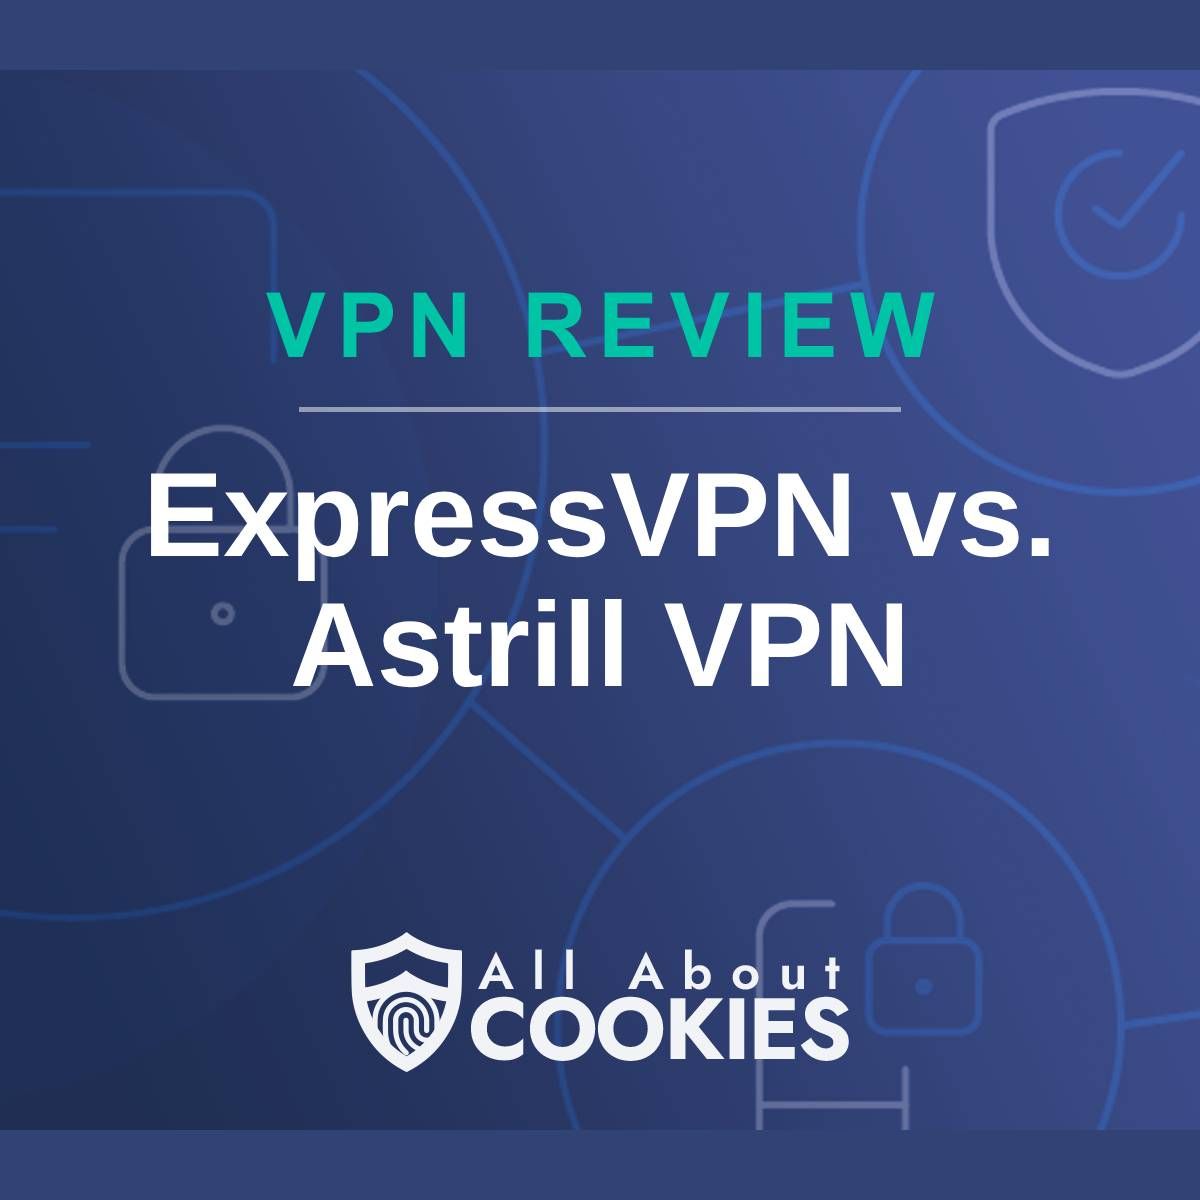 A blue background with images of locks and shields with the text &quot;VPN Review ExpressVPN vs. Astrill VPN&quot; and the All About Cookies logo. 